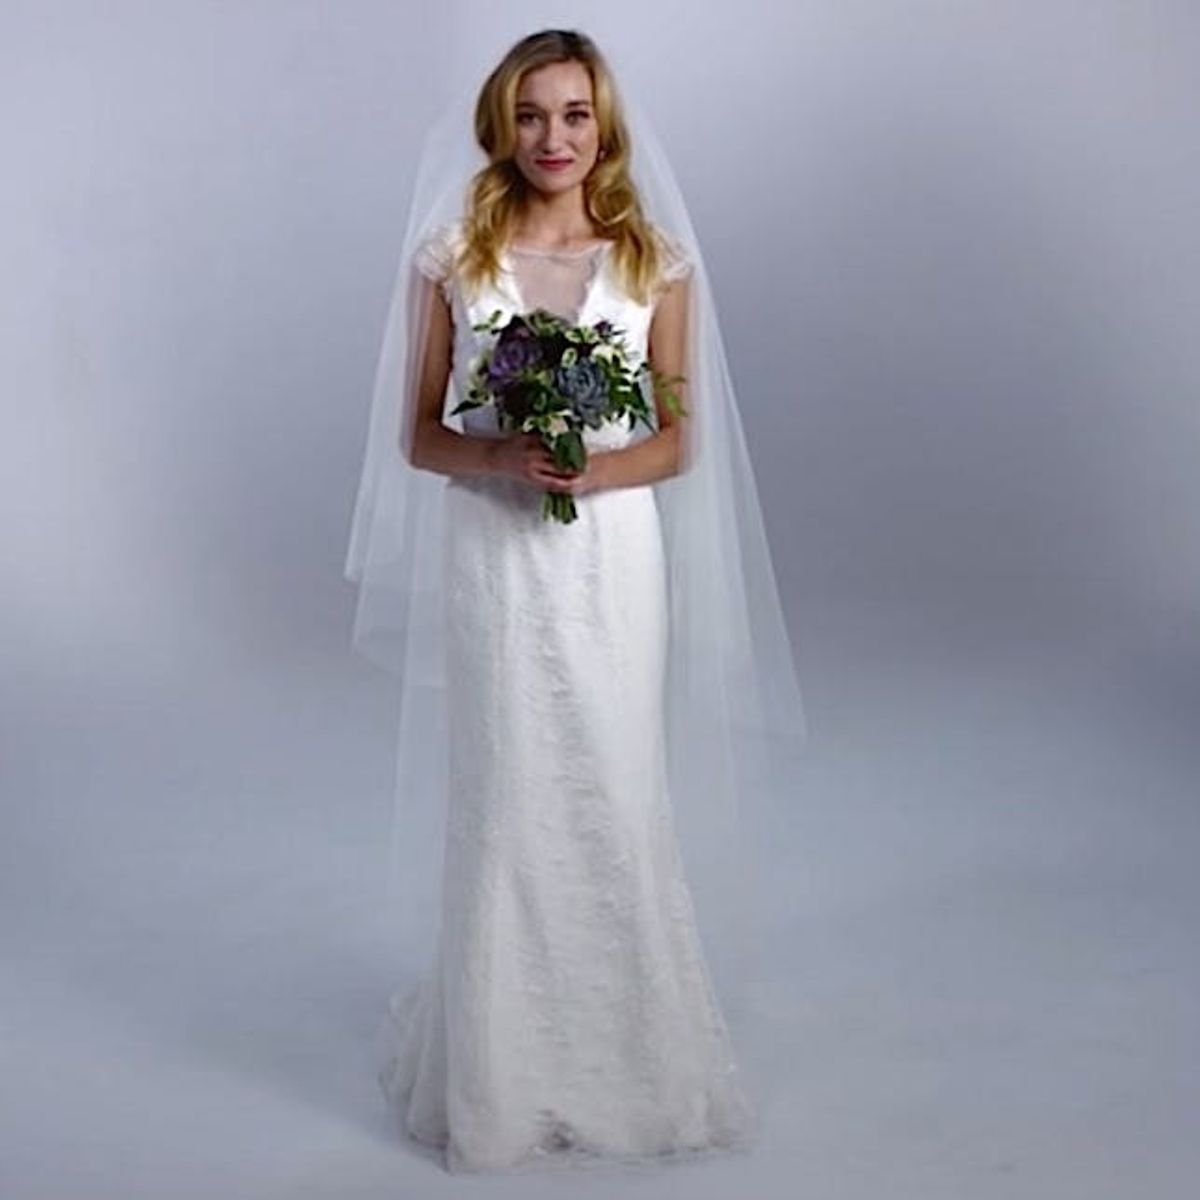 This Is What 100 Years of Wedding Dresses Looks like in 3 Minutes